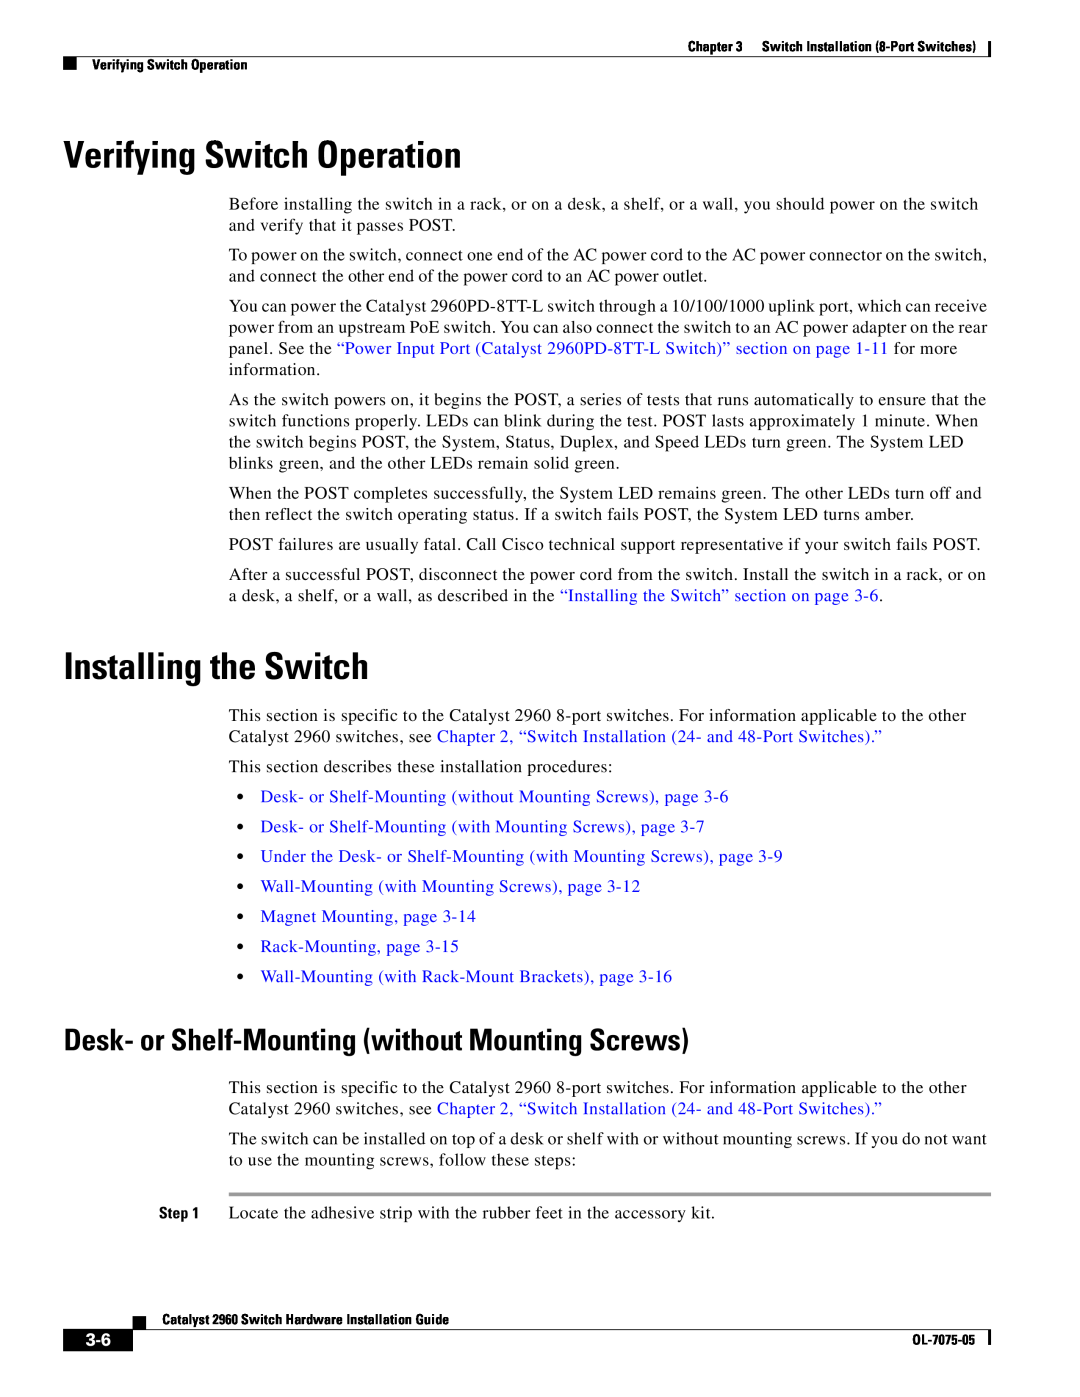 Cisco Systems 2960 Verifying Switch Operation, Desk- or Shelf-Mounting without Mounting Screws, Installing the Switch 